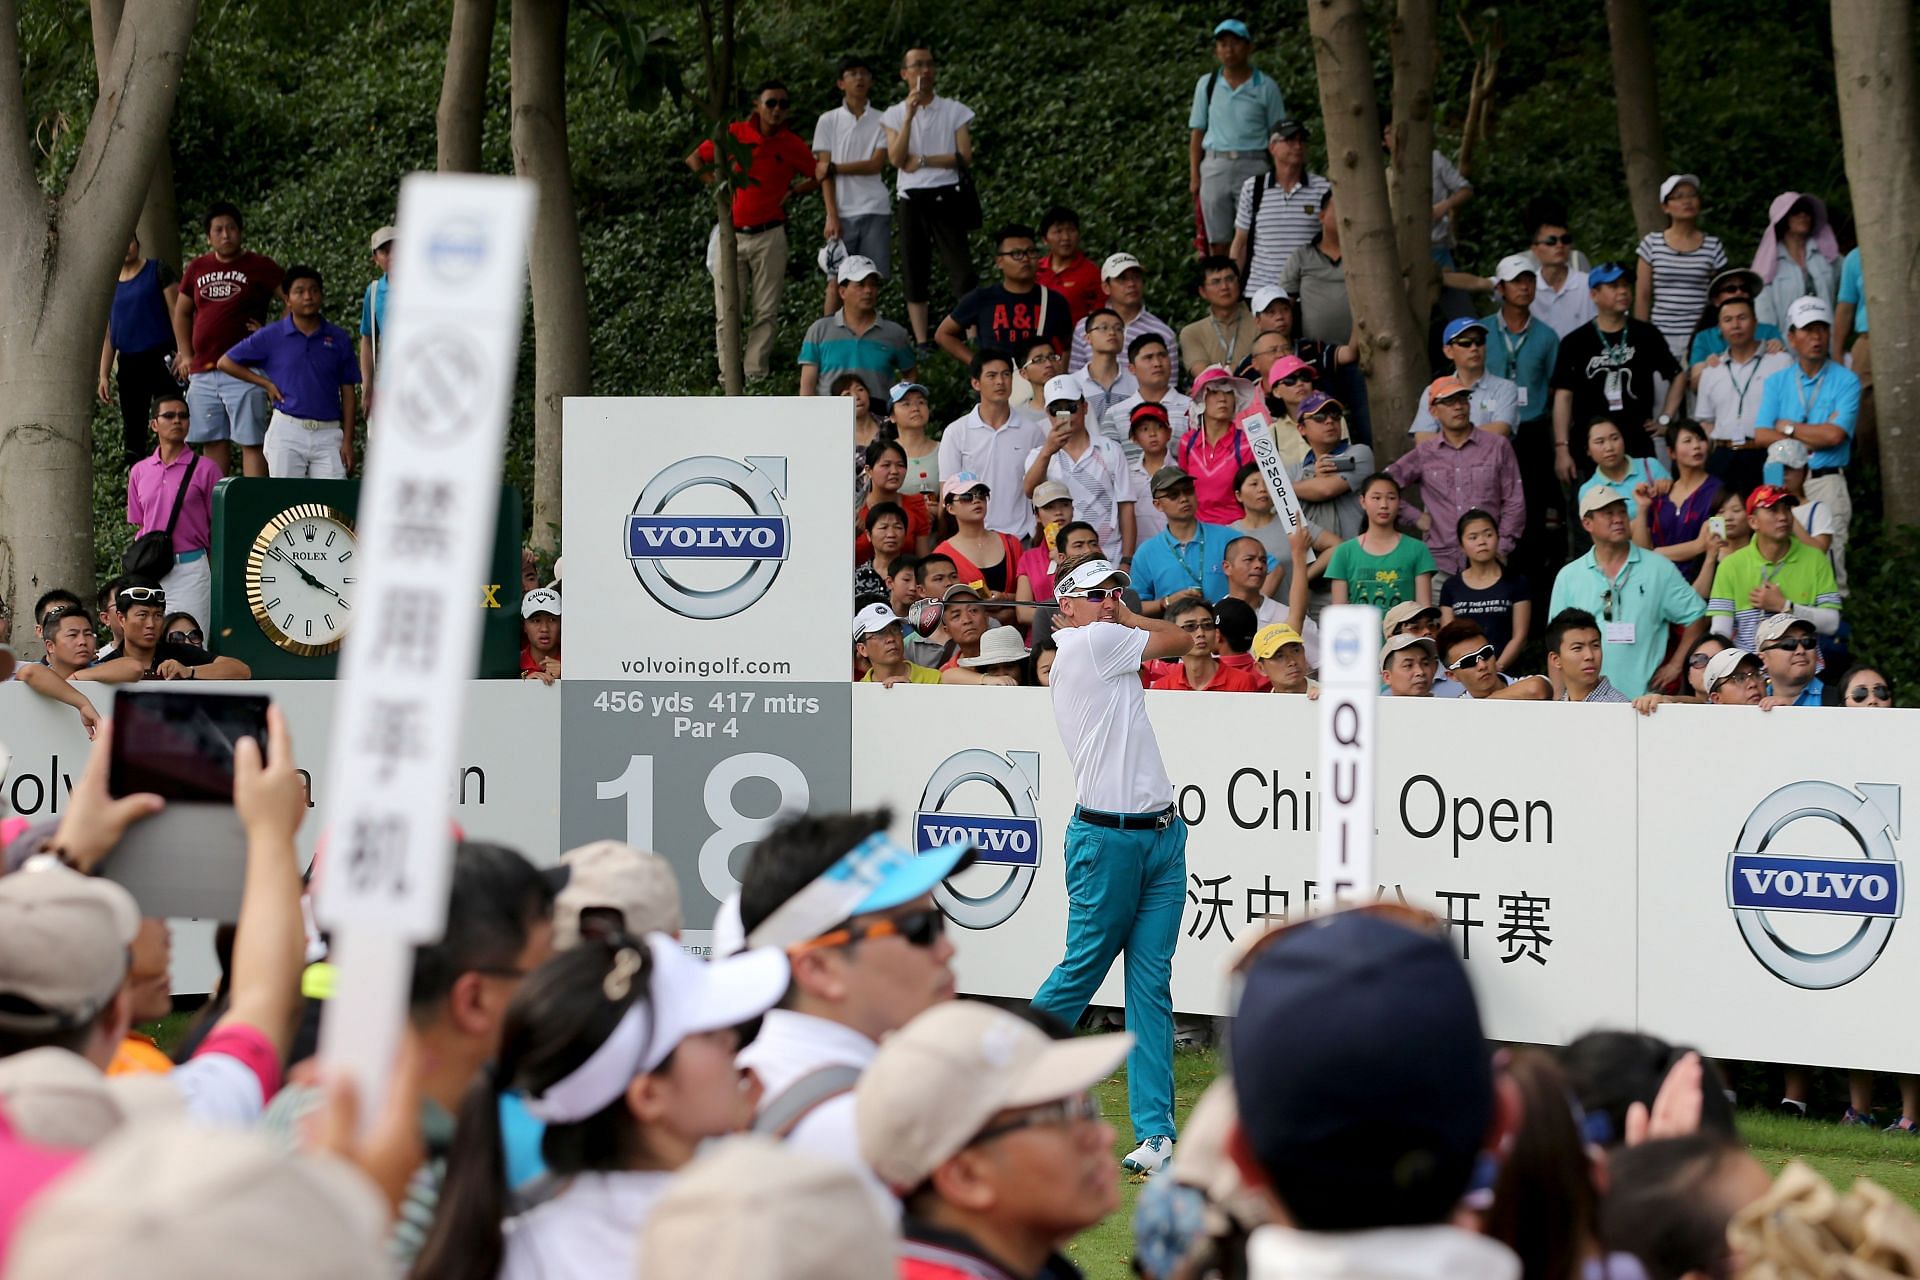 Volvo China Open - Day Four